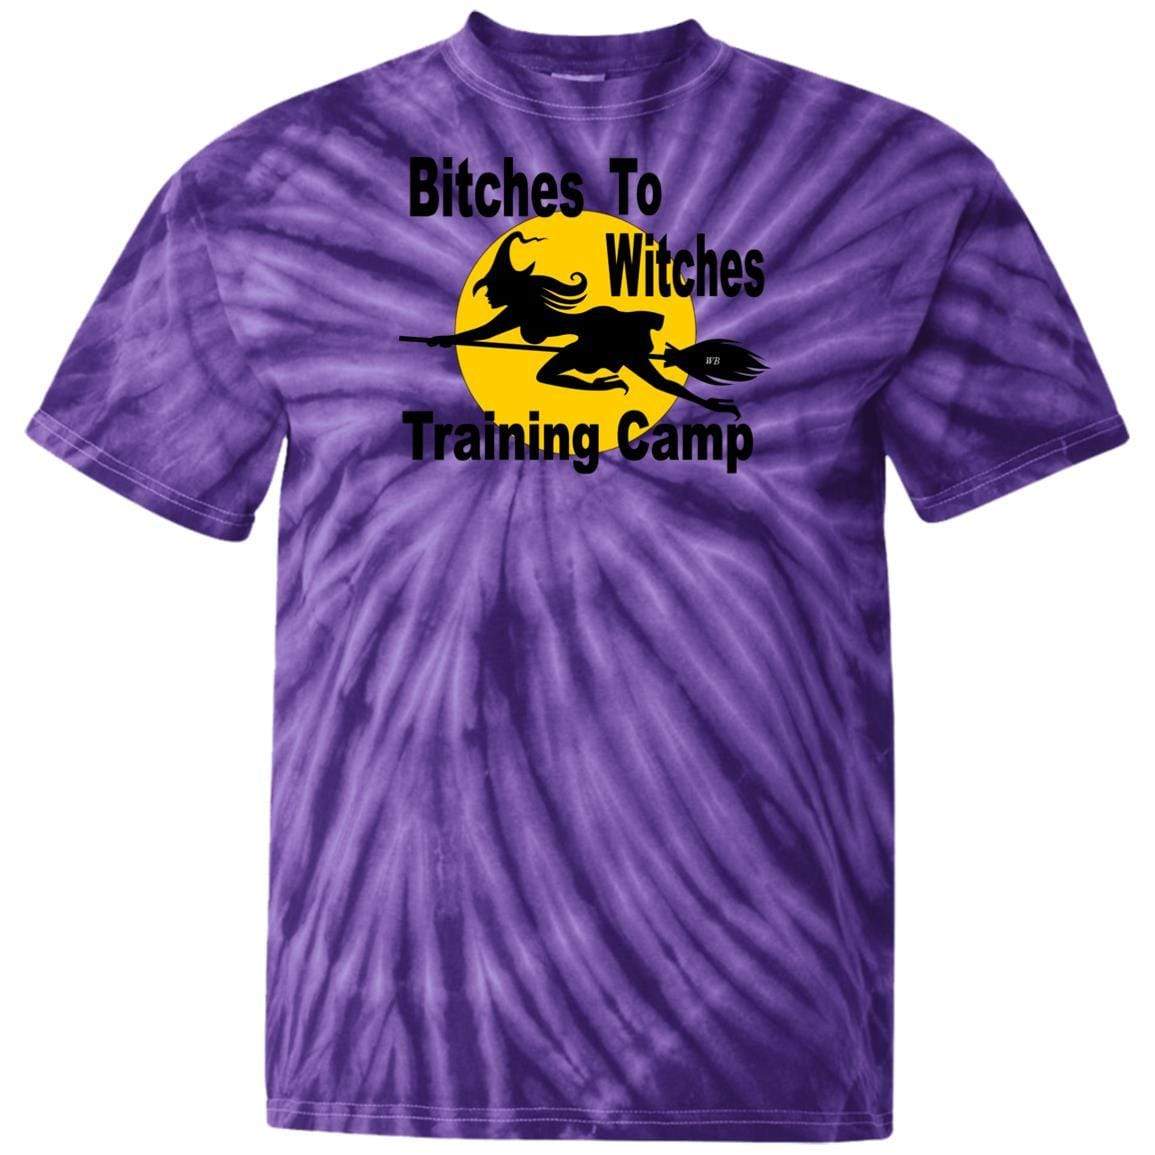 T-Shirts SpiderPurple / S WineyBitches.Co "Bitches To Witches Training Camp" - 100% Cotton Tie Dye T-Shirt WineyBitchesCo